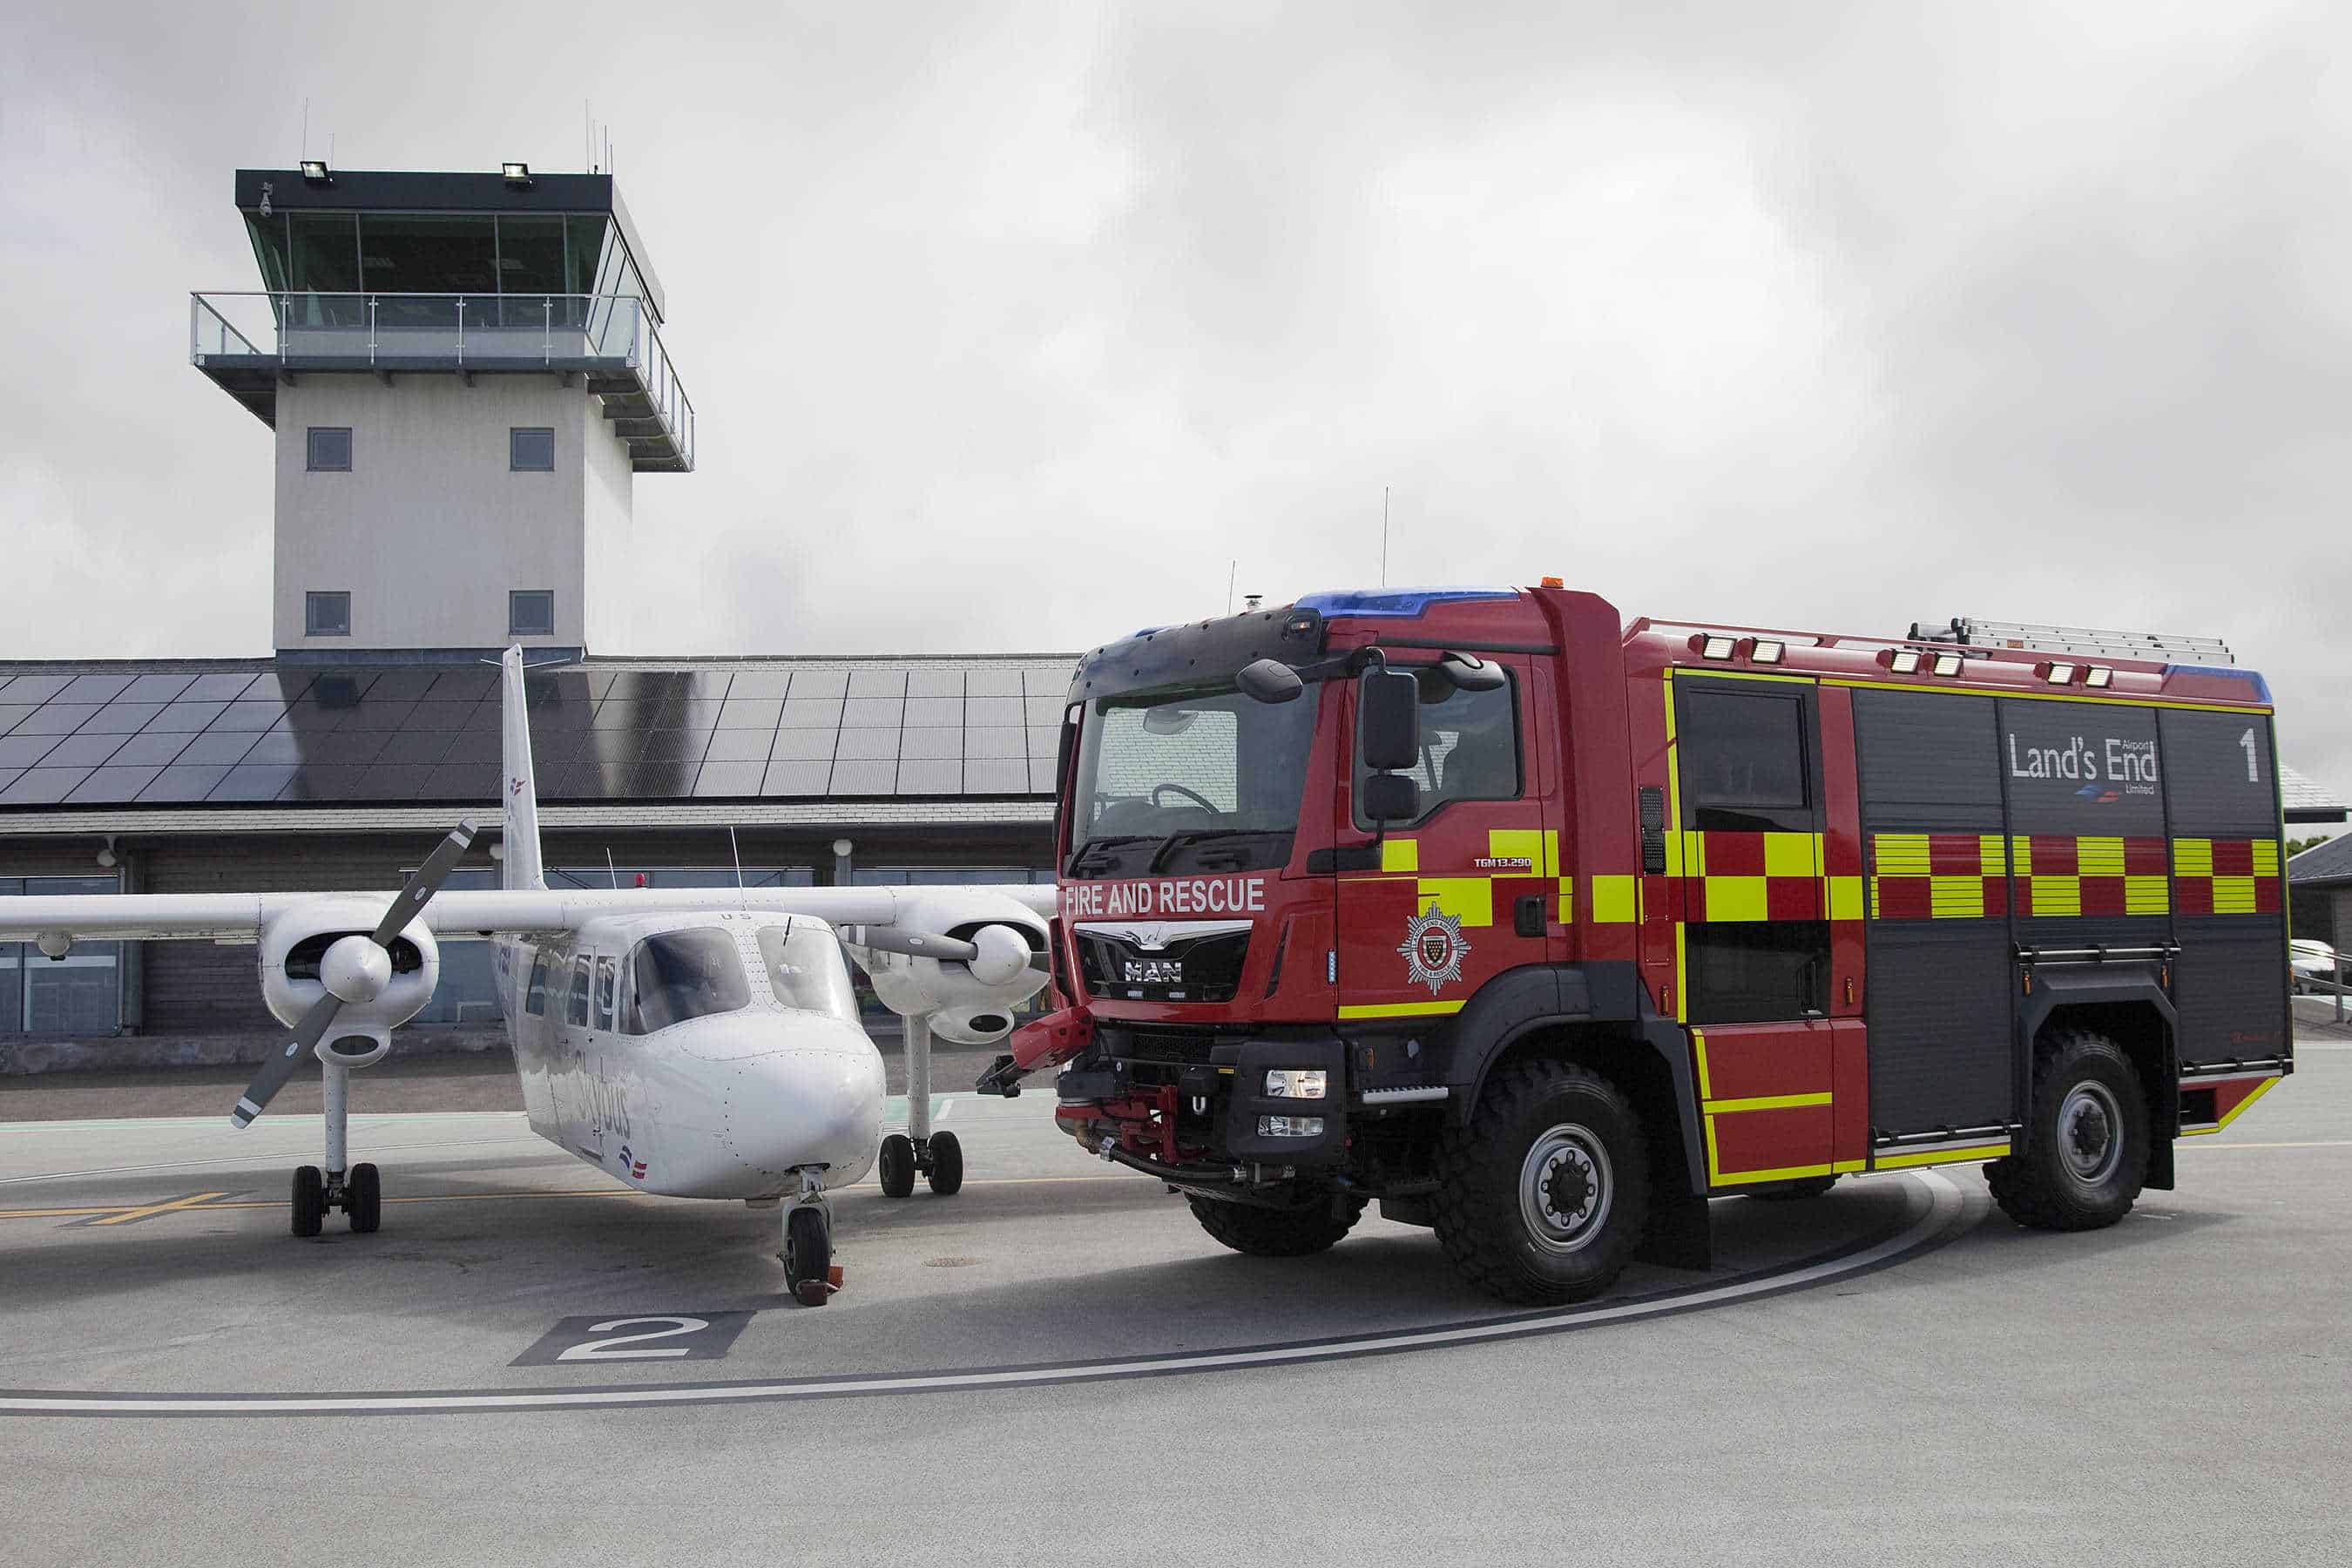 Land's End Airport have a new Rosenbauer AT (Advanced Technology) appliance.